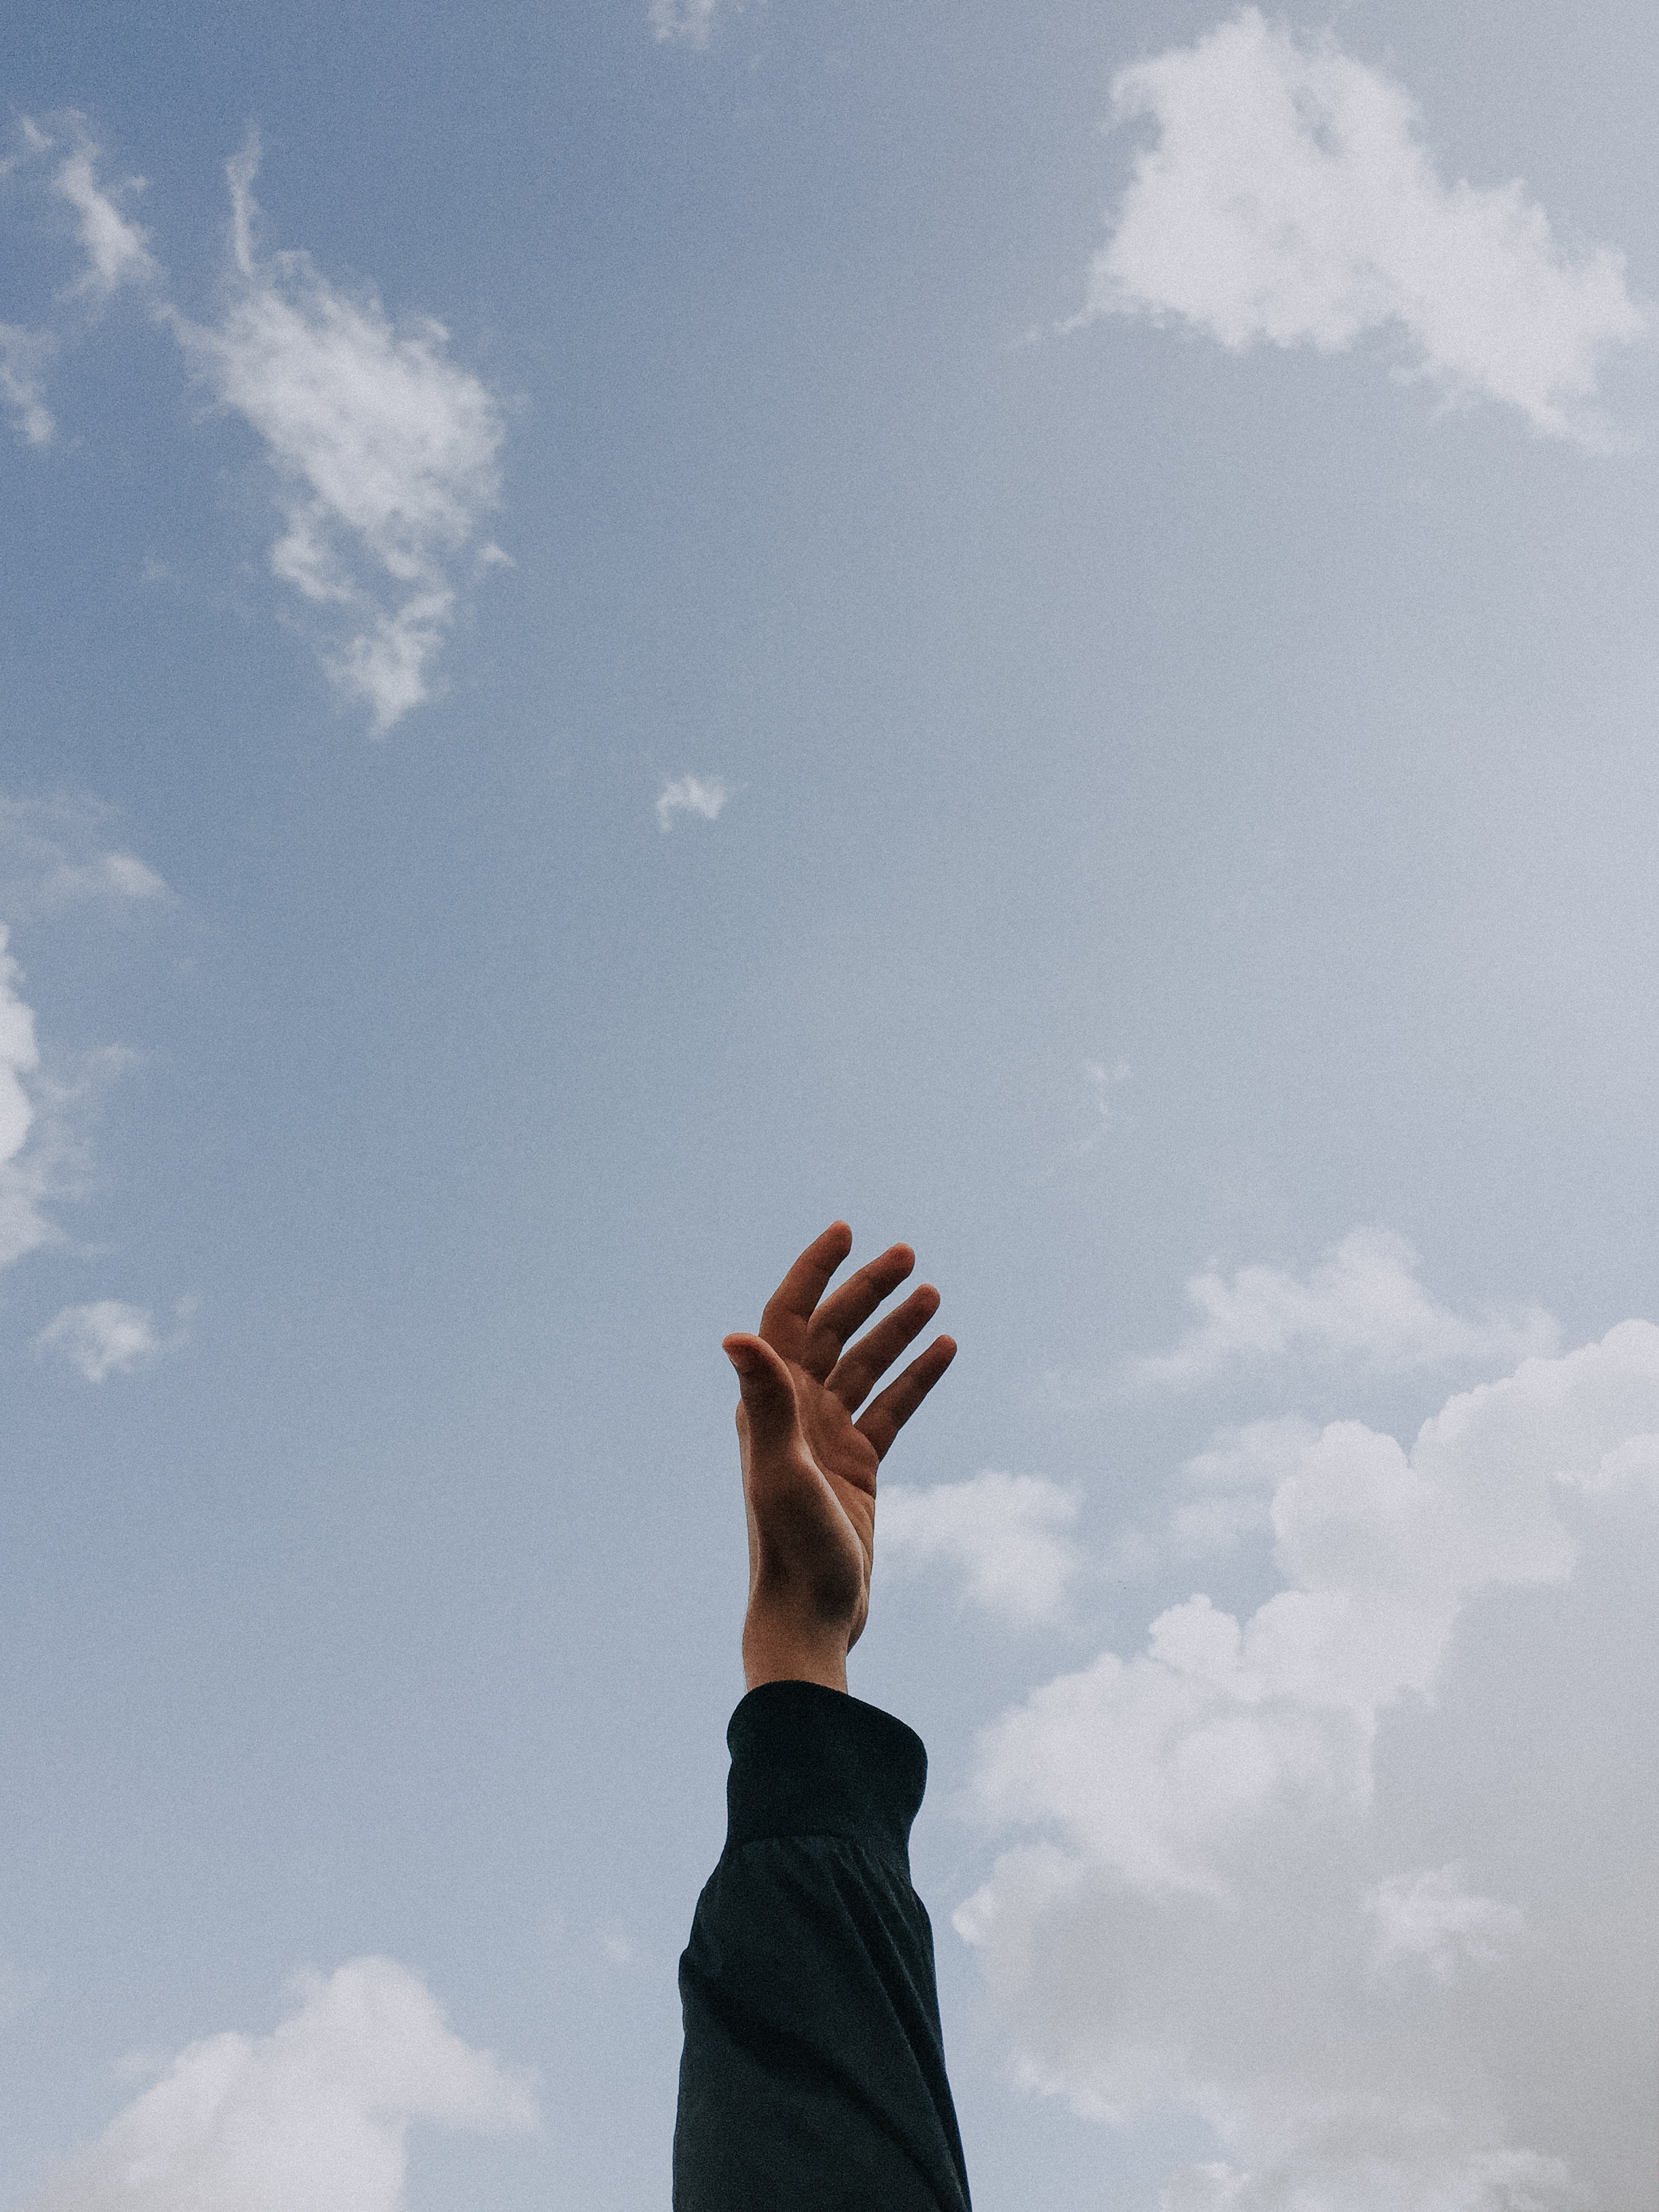 freedom, hand, minimalism, fingers, sky, clouds, lift up, raise